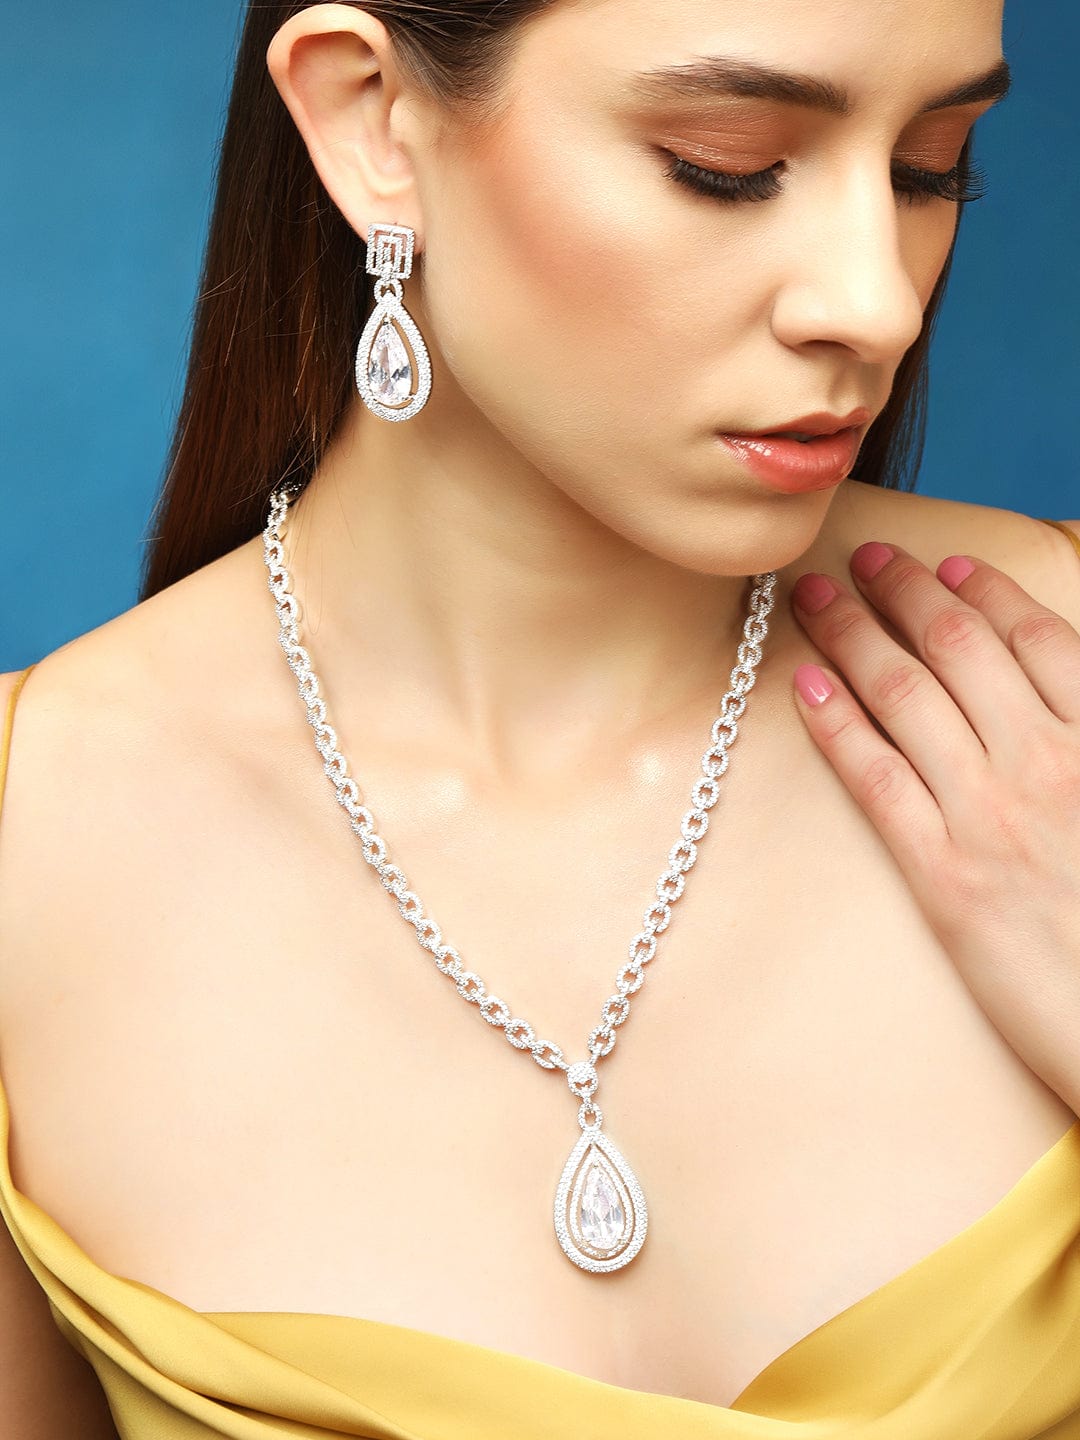 Rubans Silver-Plated AD Studded Necklace Jewellery Set Necklace Set